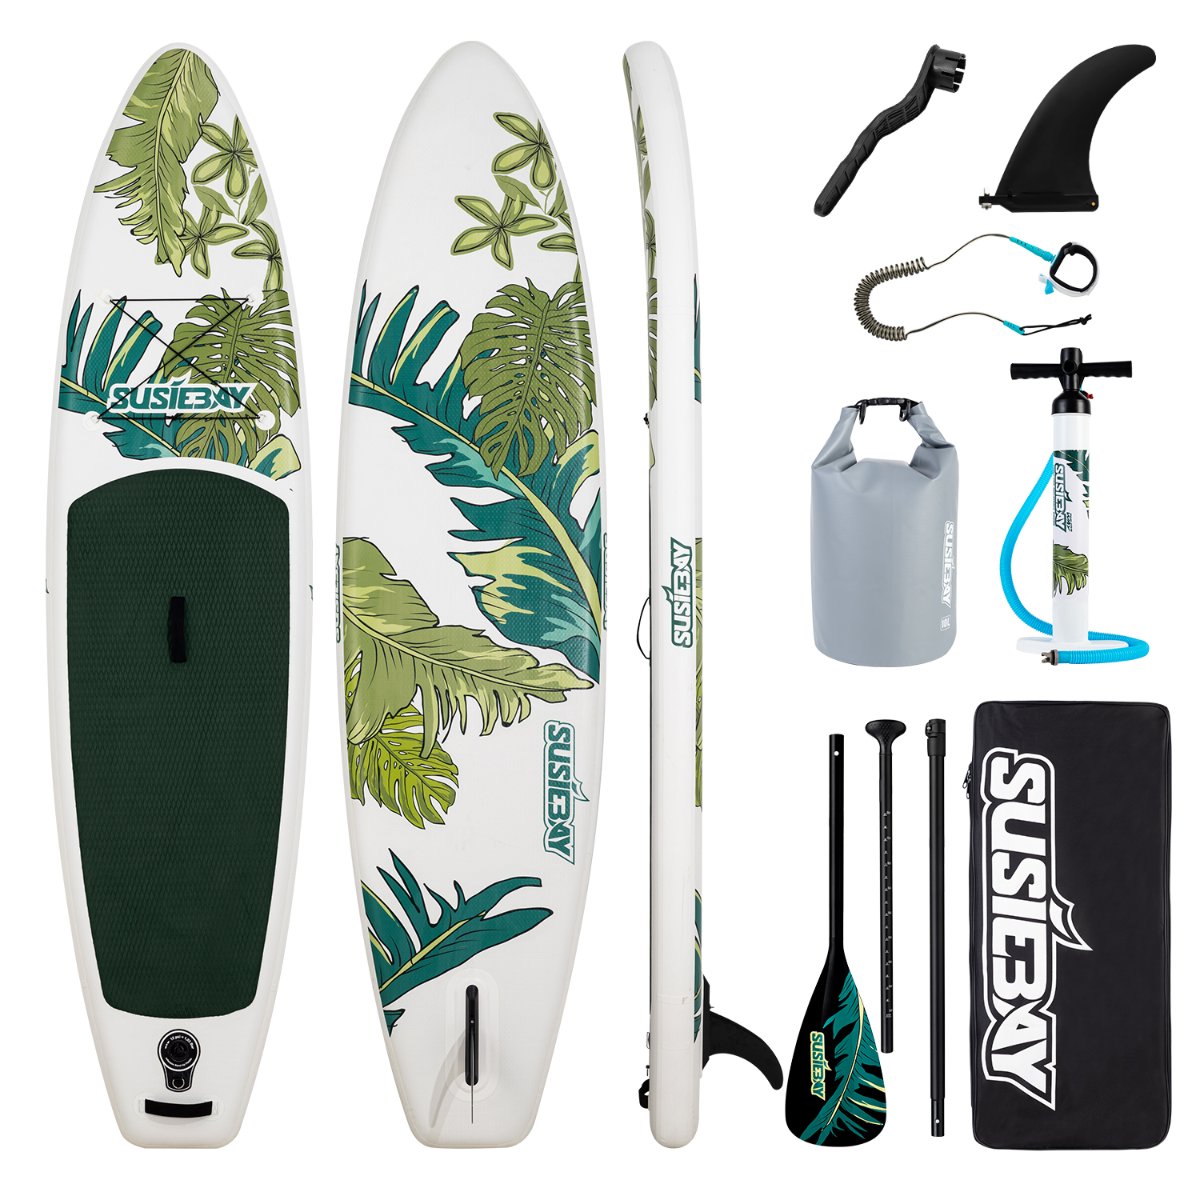 Susiebay Paddle Board, Stand Inflatable Up Paddle Paddle Yoga Floating Board Board,